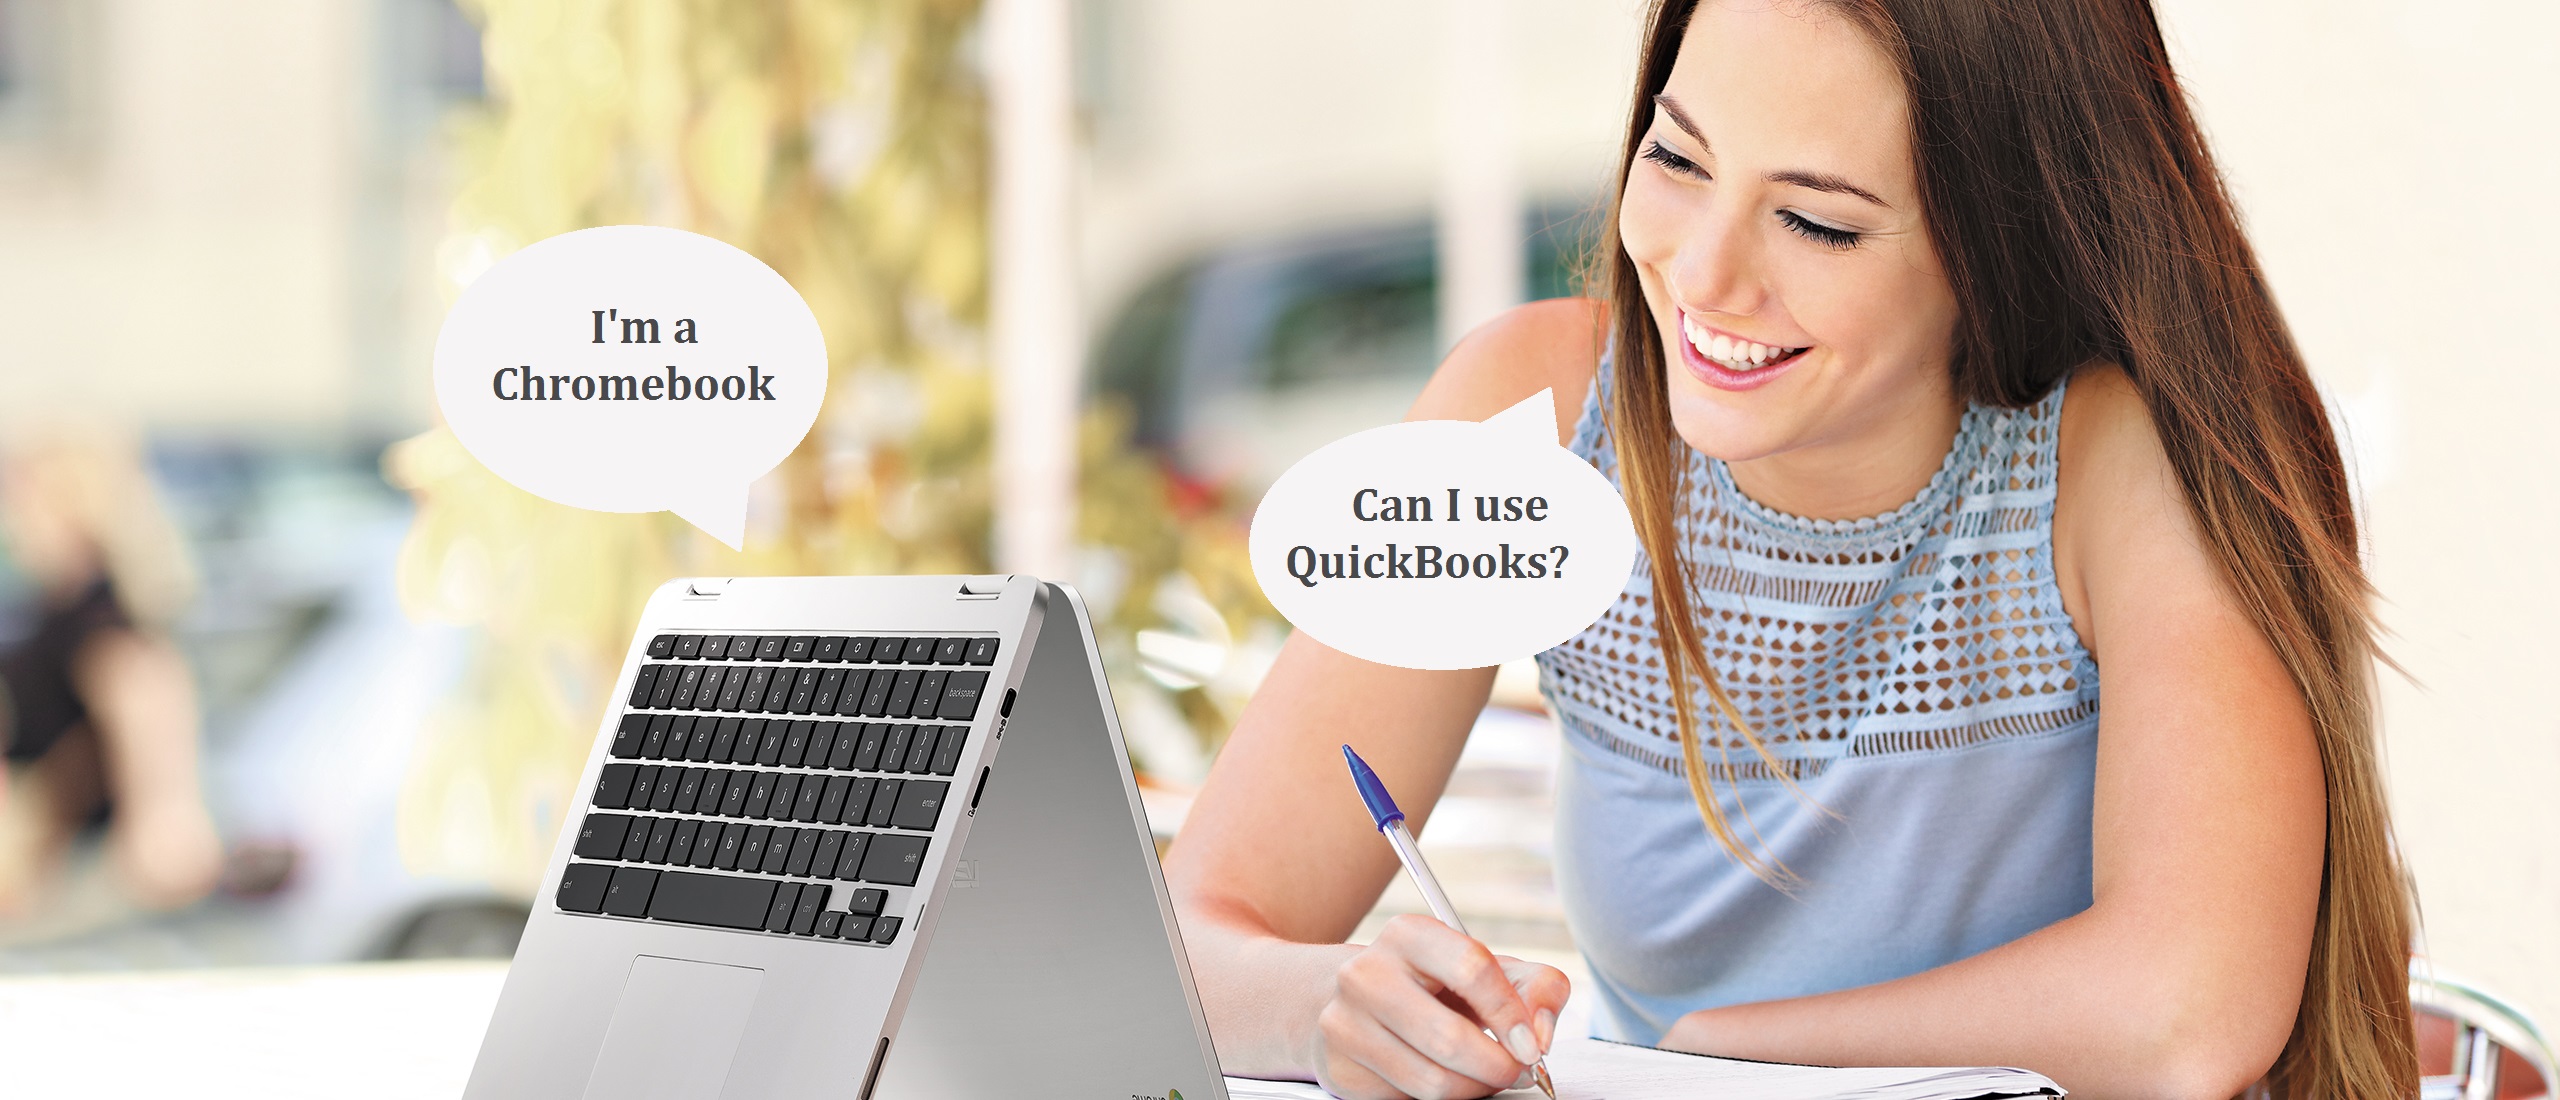 How to Use QuickBooks for Chromebook?